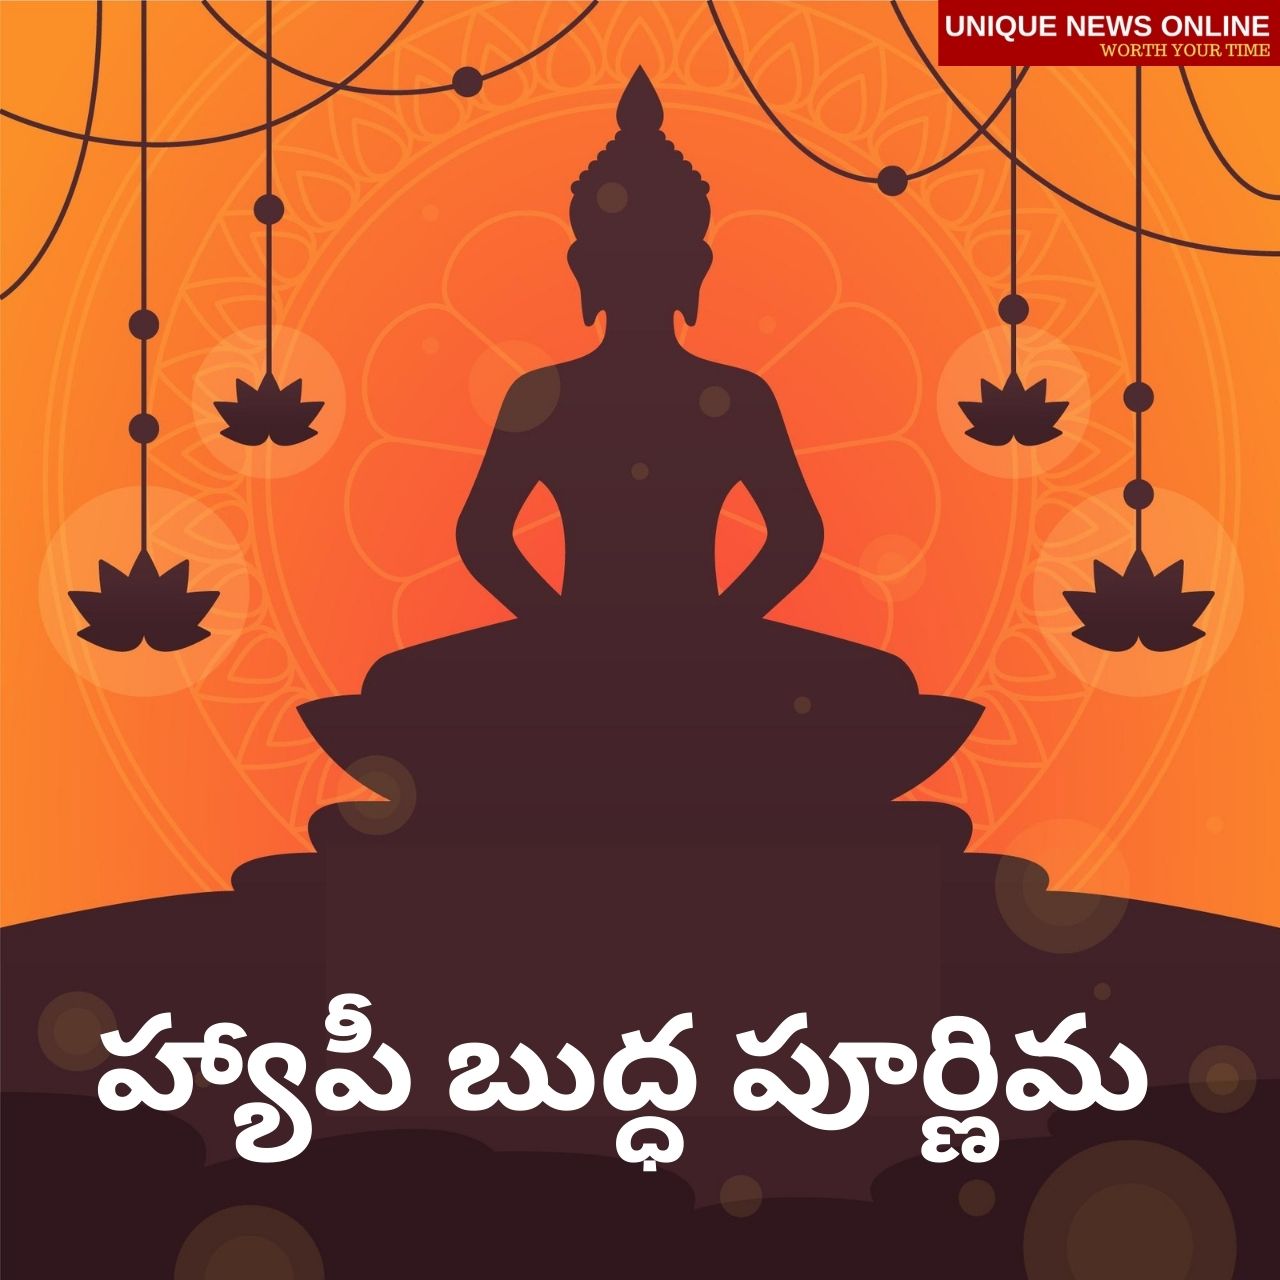 Buddha Purnima 2021: Telugu and Kannada Wishes, HD Images, Greetings, Quotes, Status, and WhatsApp Messages to Share